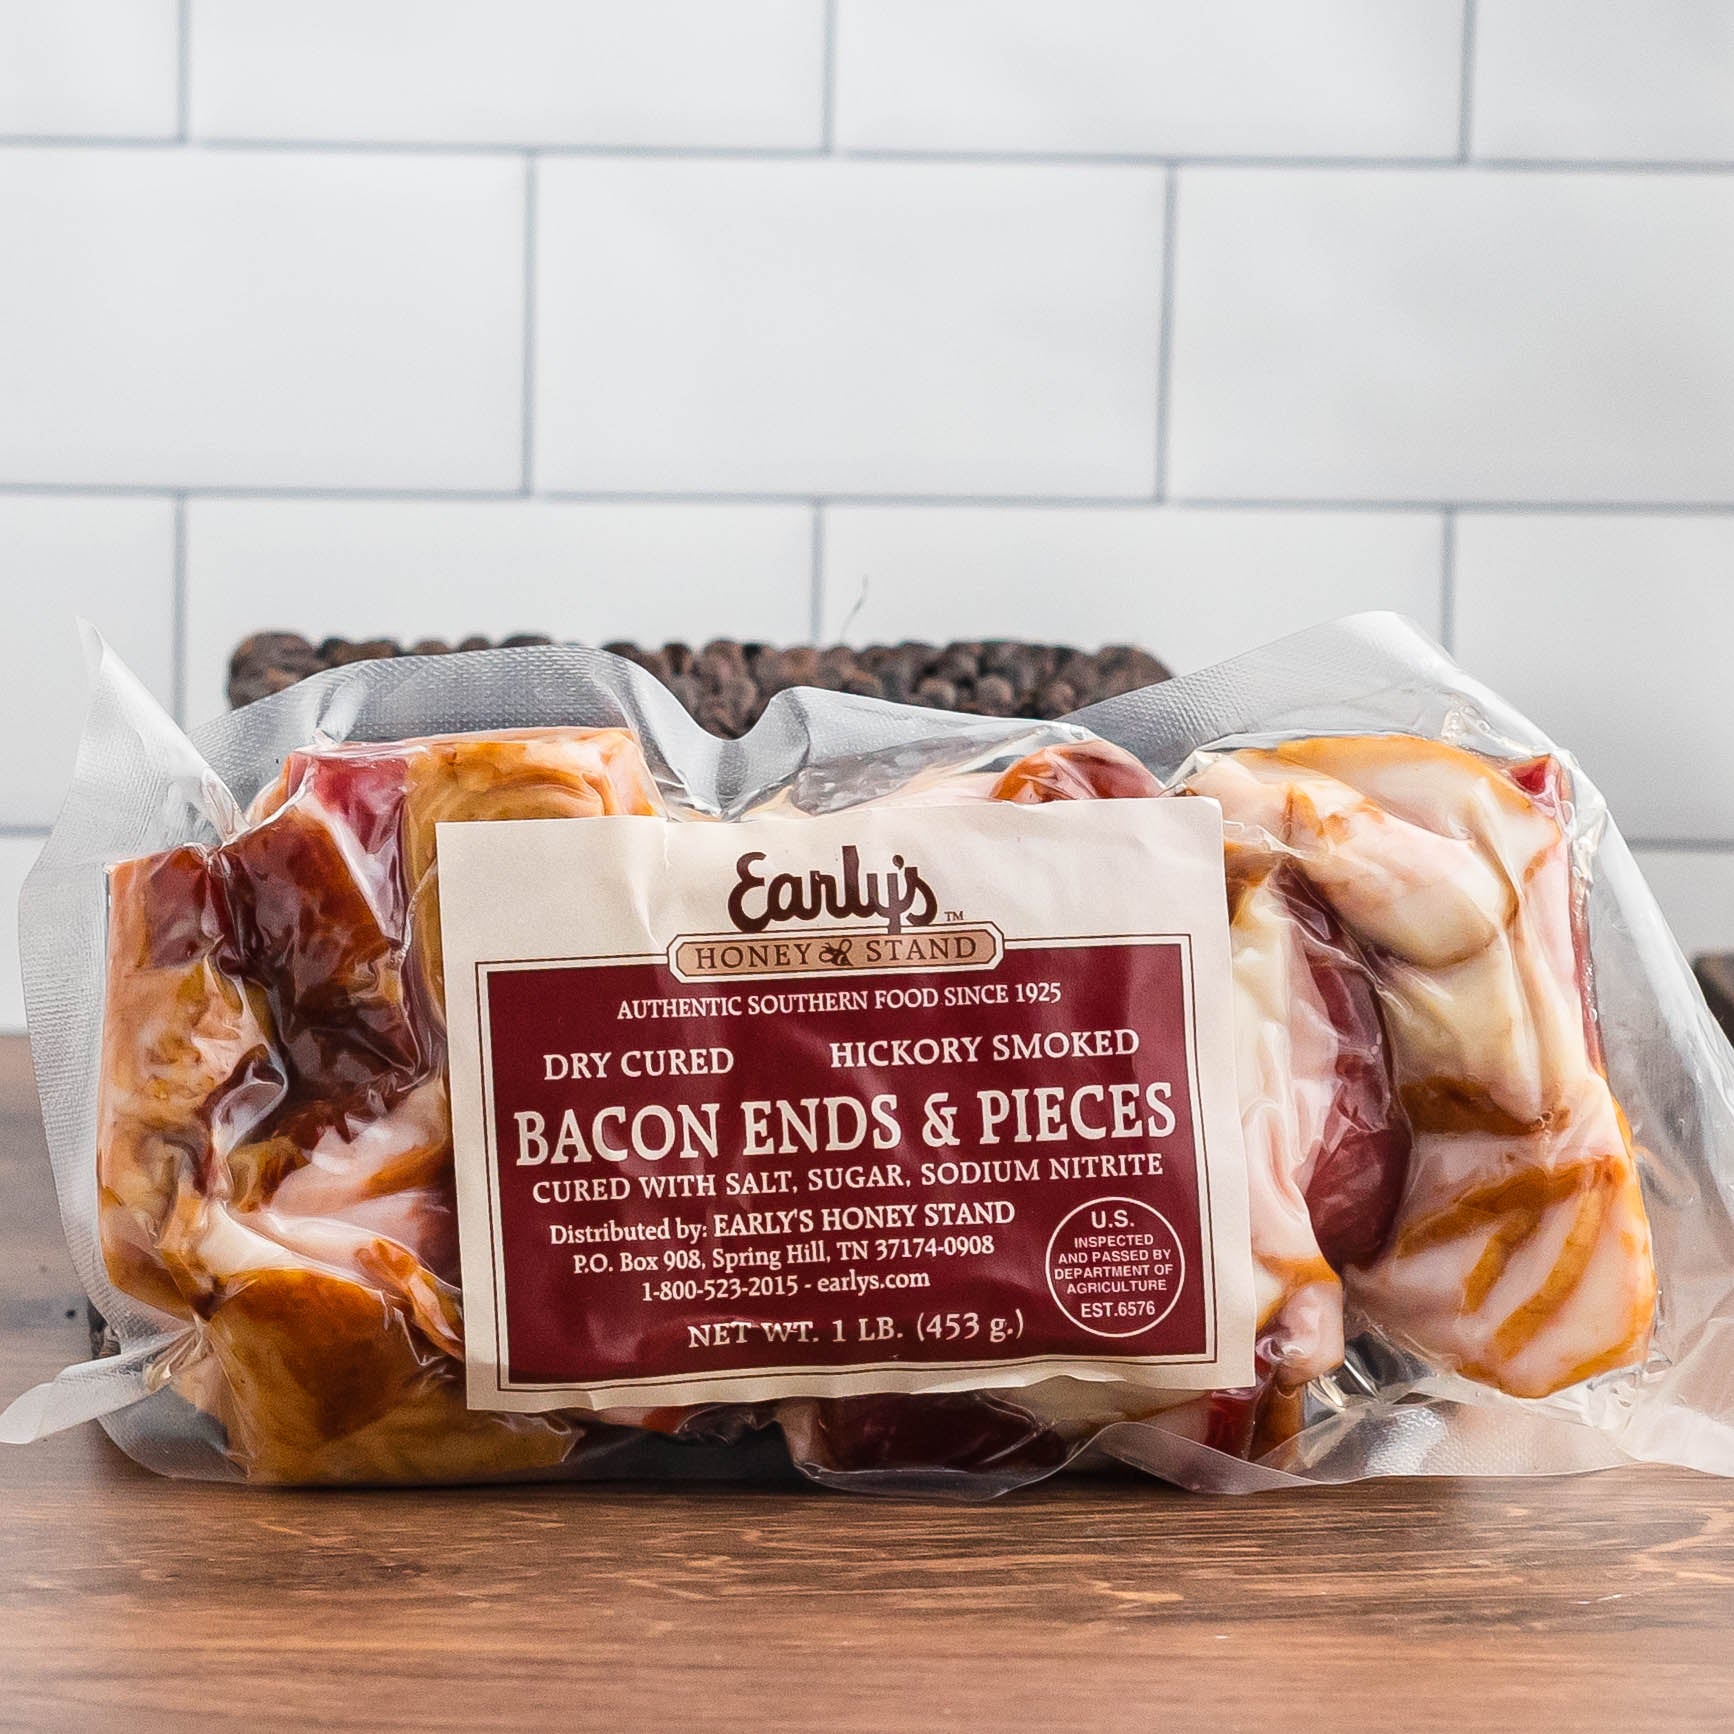 Country bacon, Dry-cured bacon, Hickory-smoked bacon, Artisanal bacon, Premium bacon, Gourmet bacon, Hickory-smoked meats, Country-style bacon, Dry-cured meats, Bacon ends and pieces, Bacon for cooking, Meat seasonings, Meat toppings, Pork seasonings, Pork toppings, Savory bacon pieces